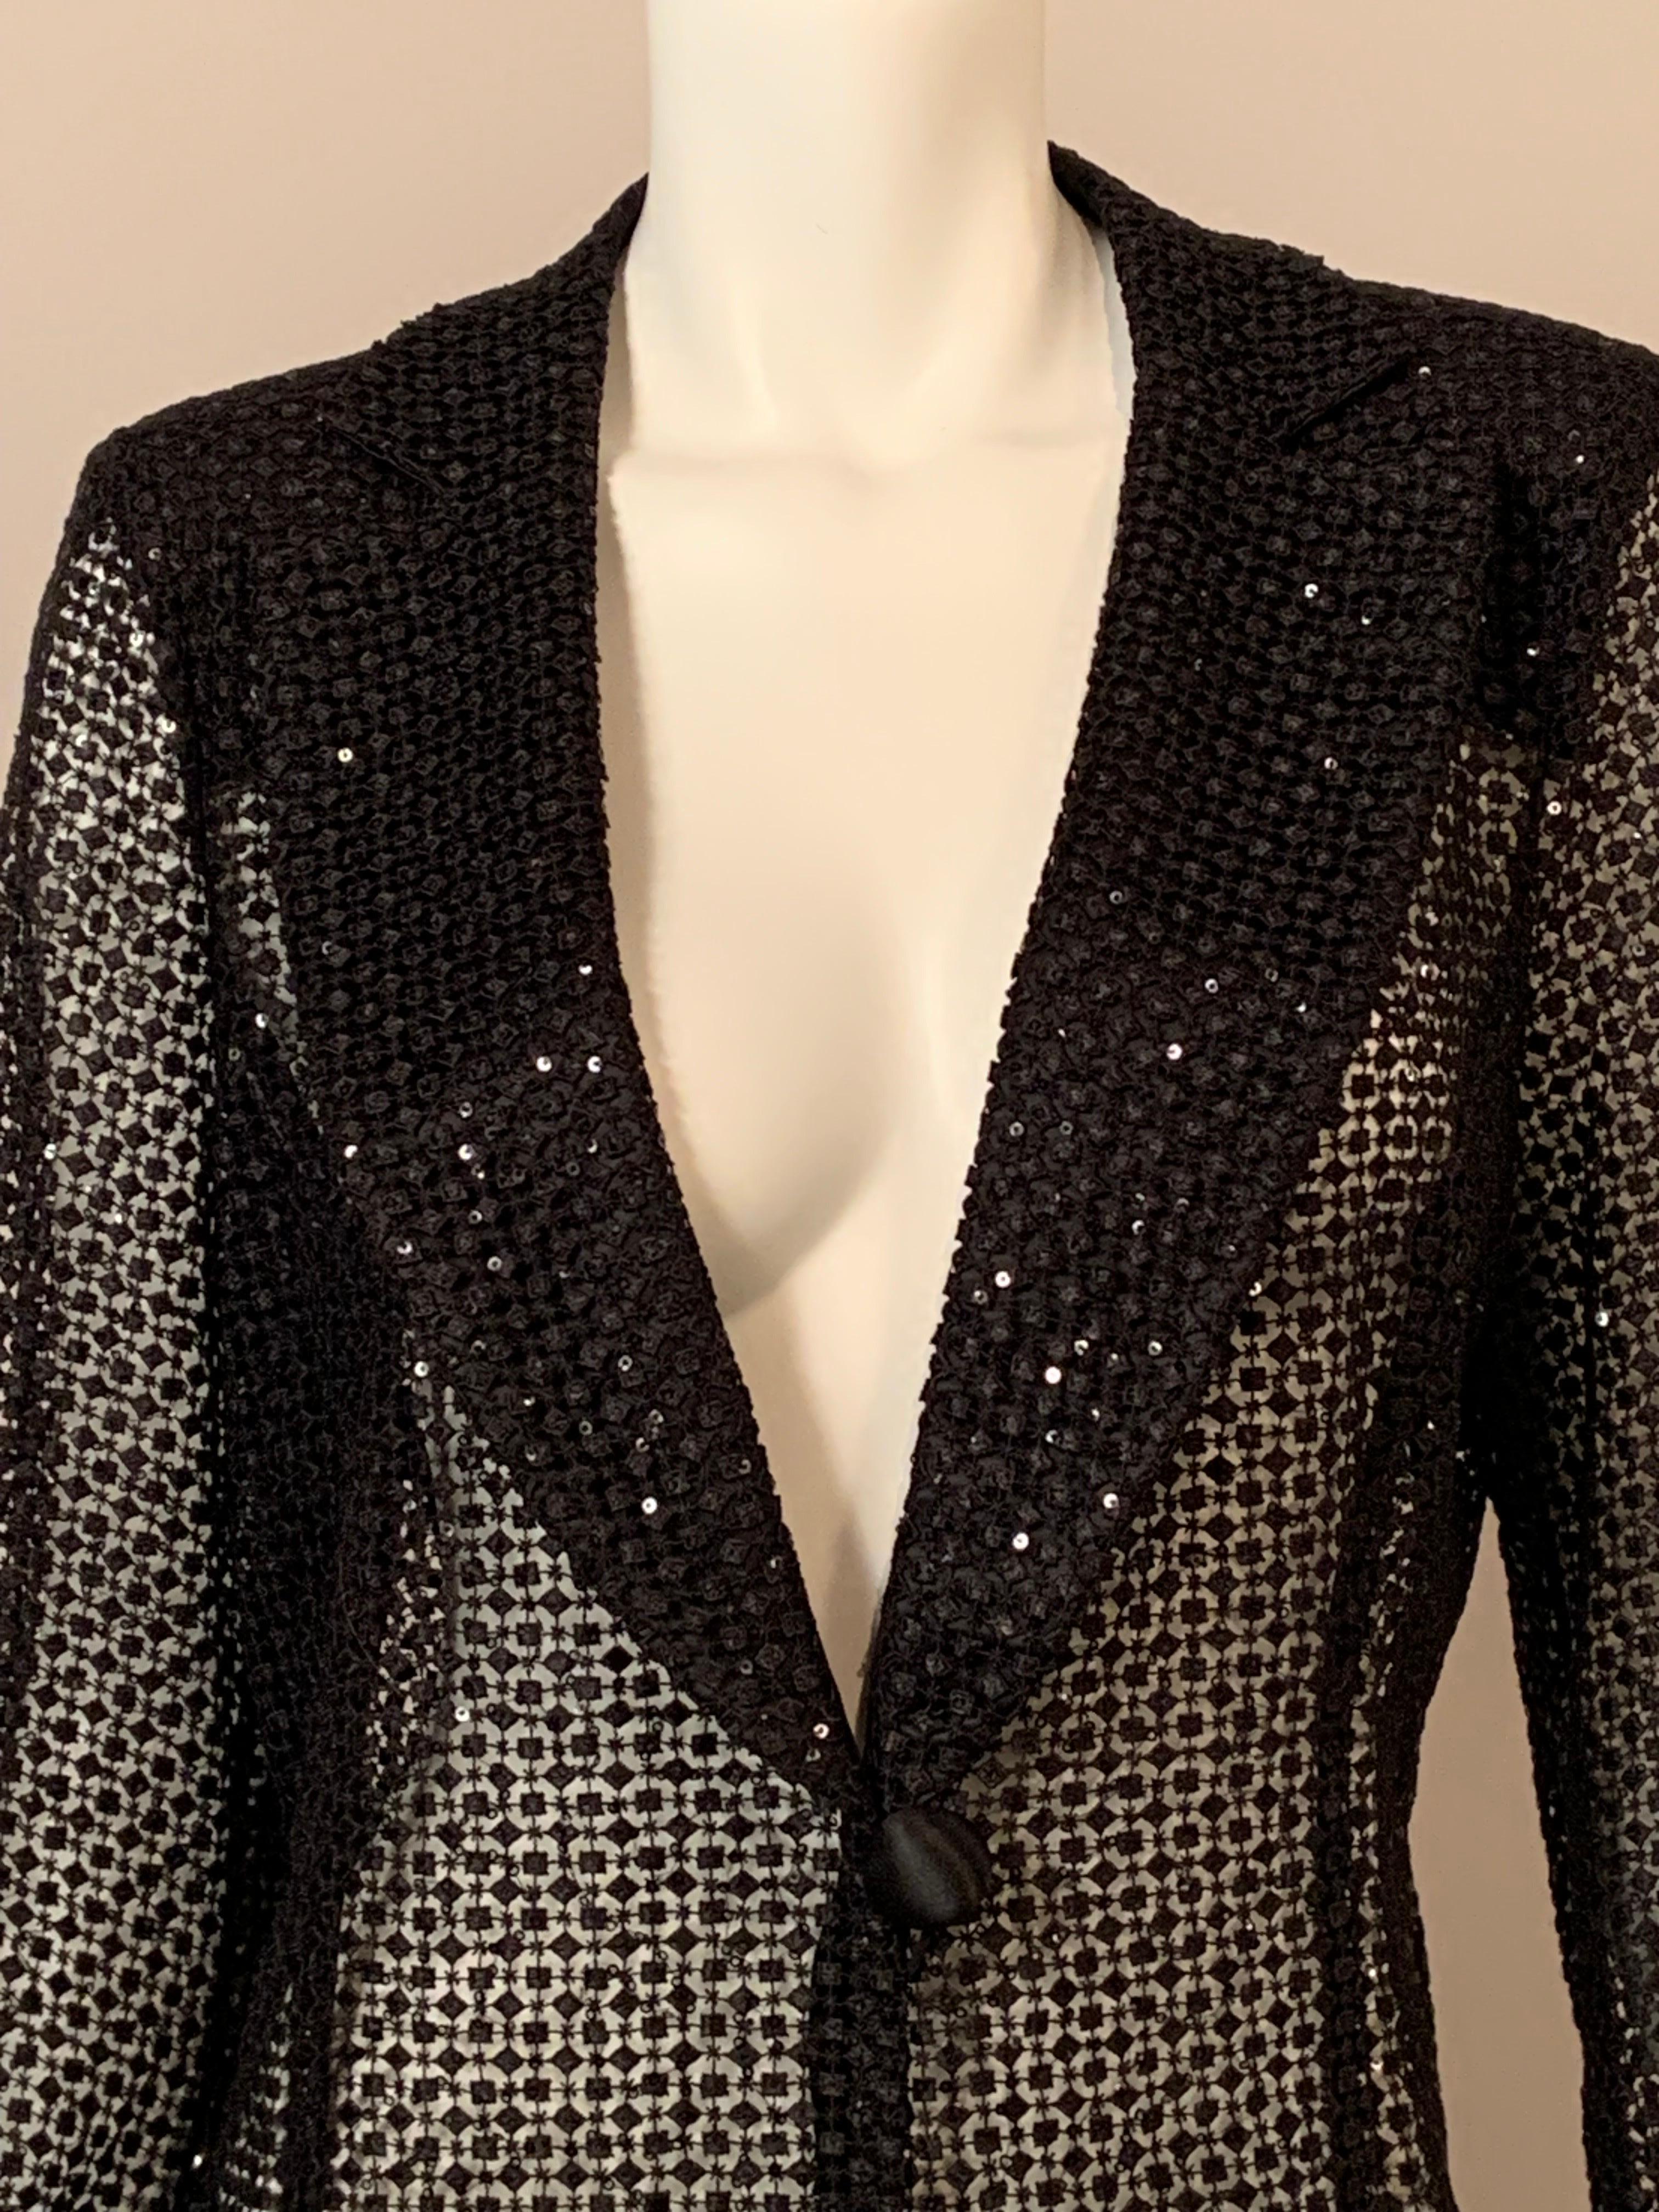 This sparkling Armani jacket has black satin lapels, cuffs and a single button and loop closure. The lapels are covered with the open work fabric used for the body of the jacket. The fabric is embellished with black sequins adding another layer of